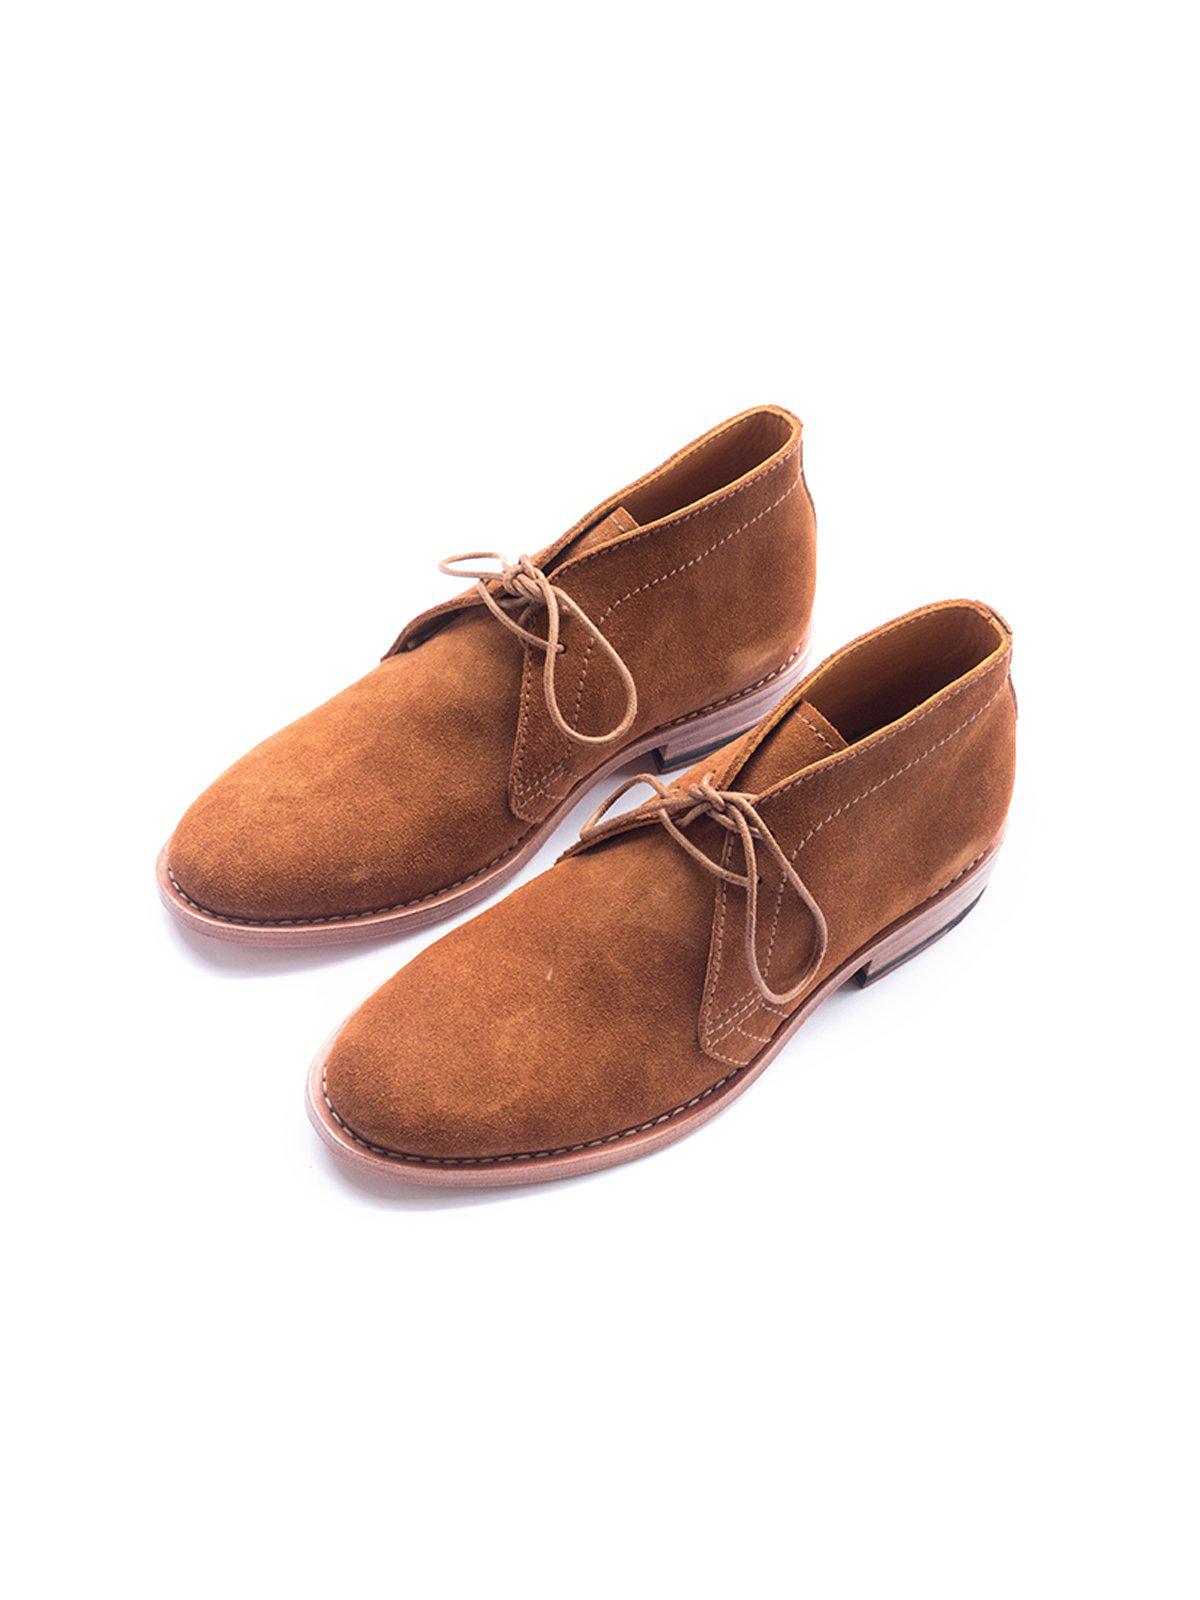 Santalum Casual Rover Chukka Brown Suede Leather - MORE by Morello Indonesia